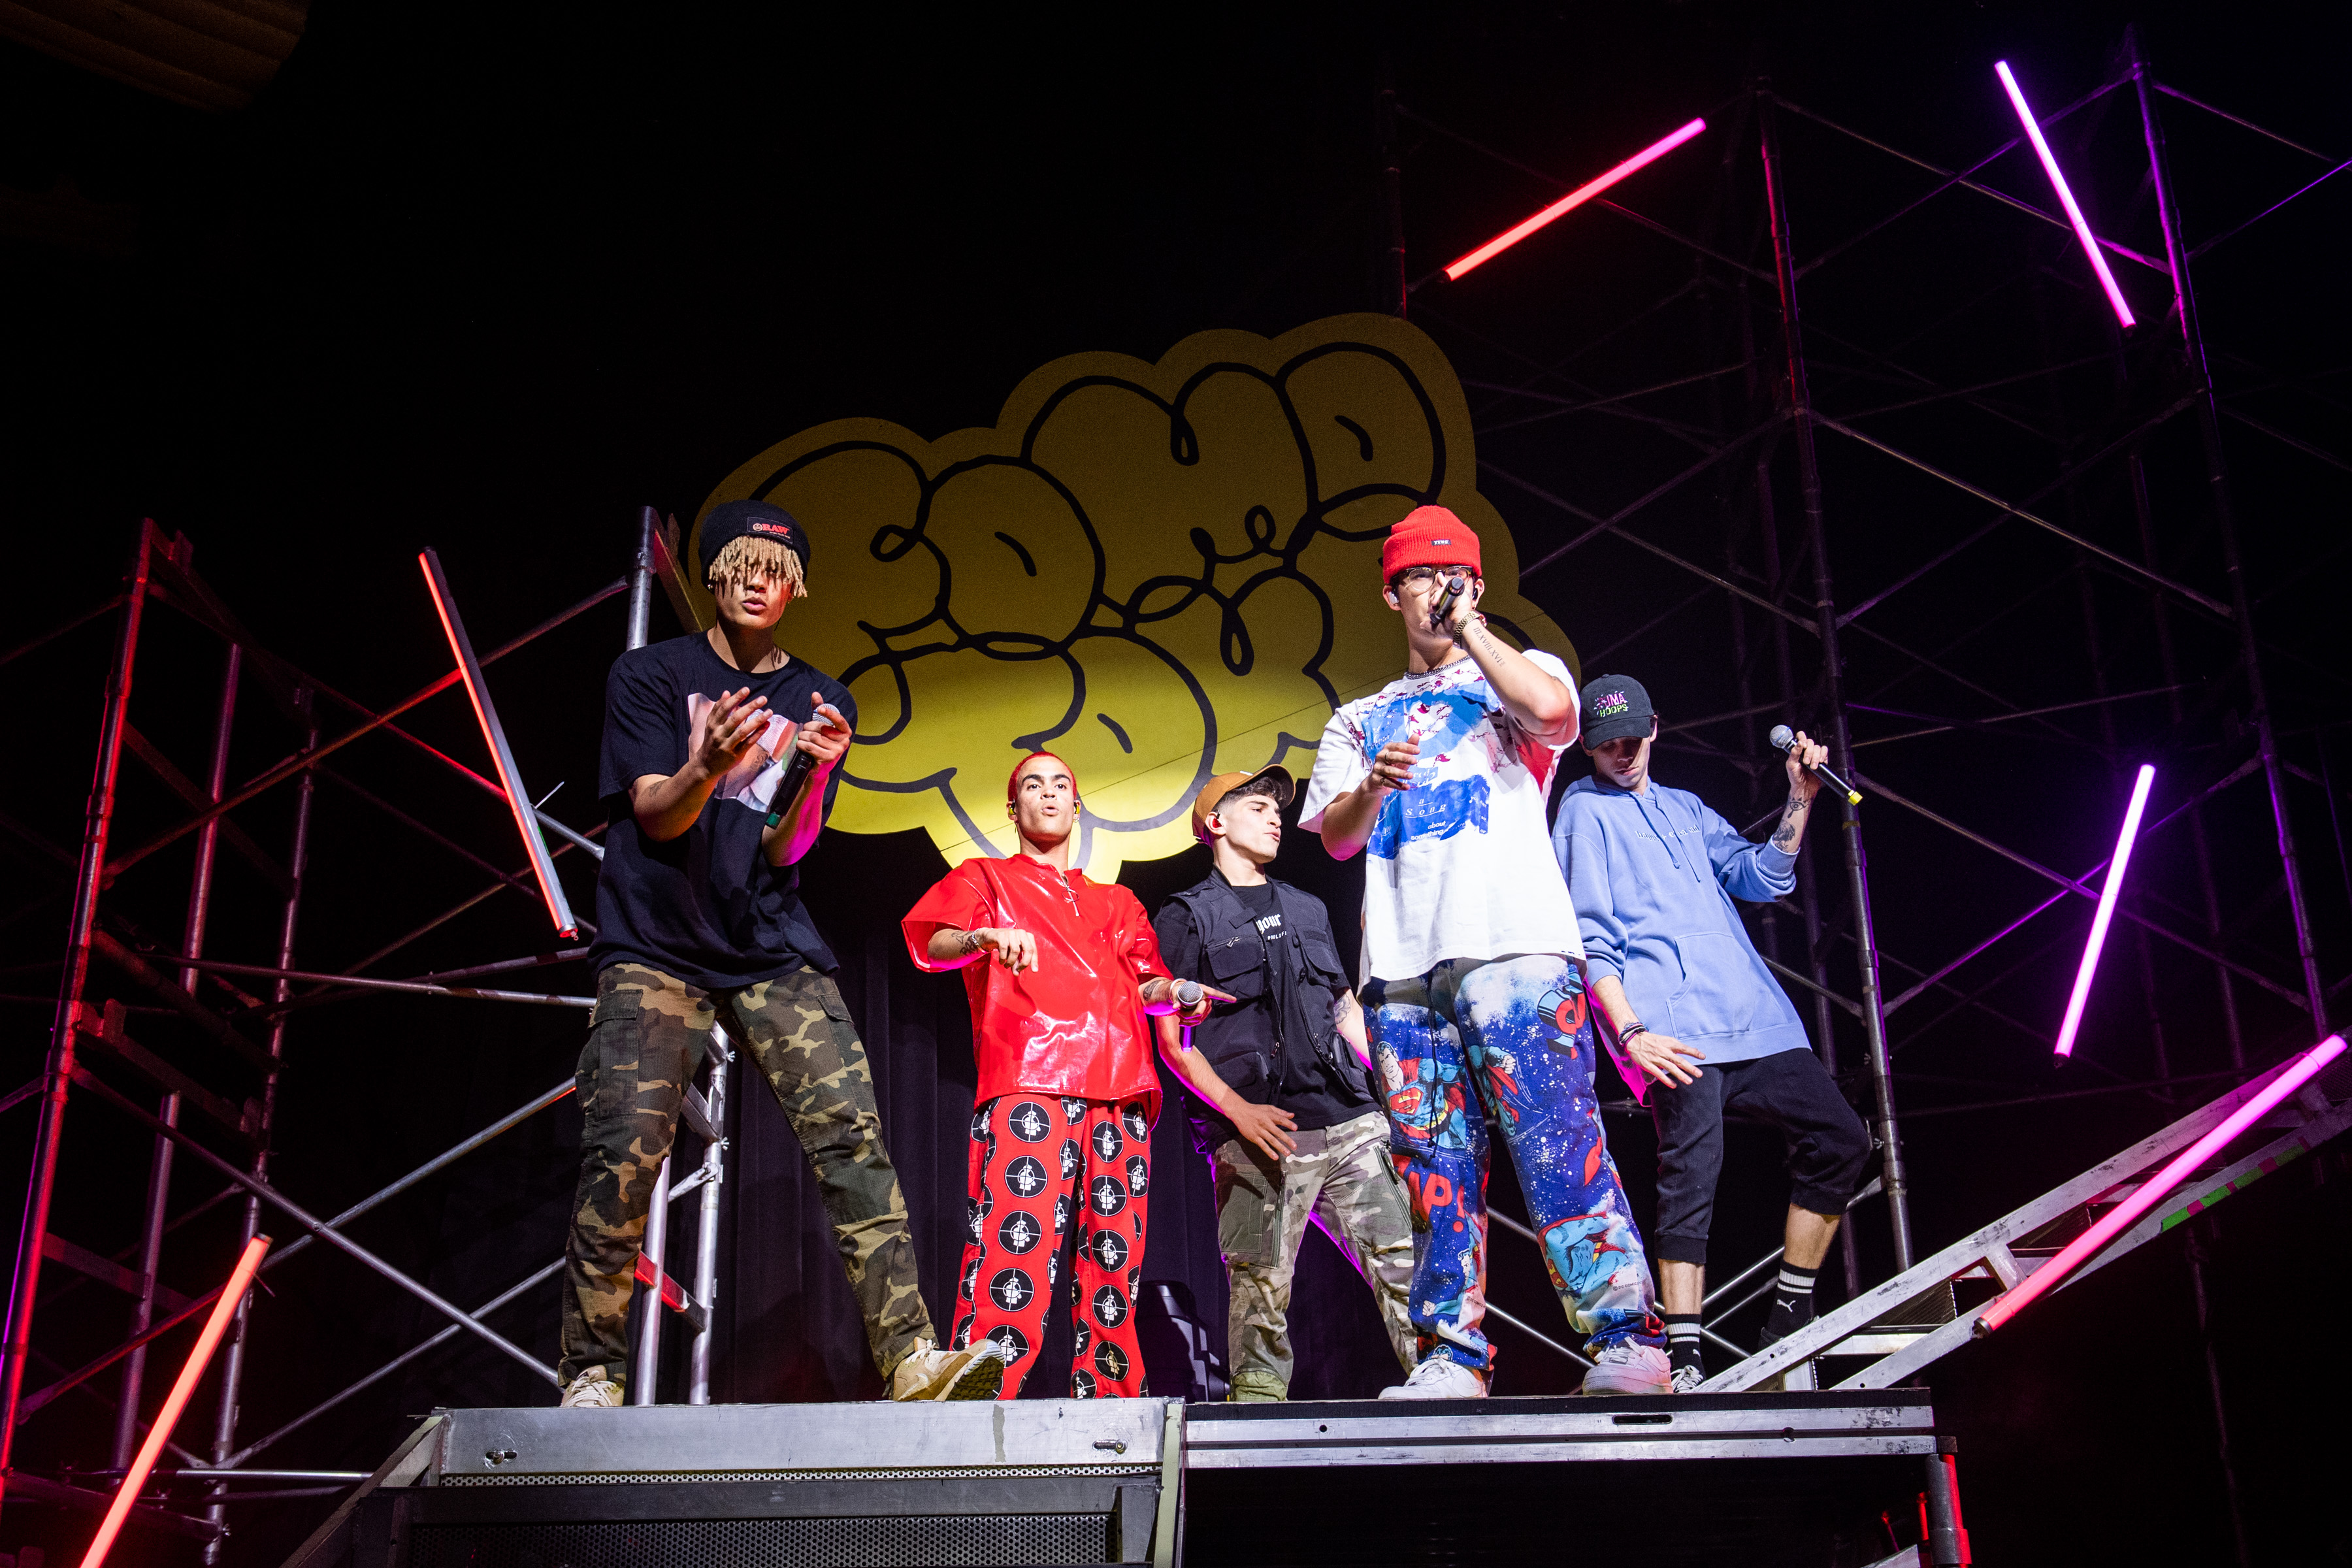 PrettyMuch Performs At The Hollywood Palladium